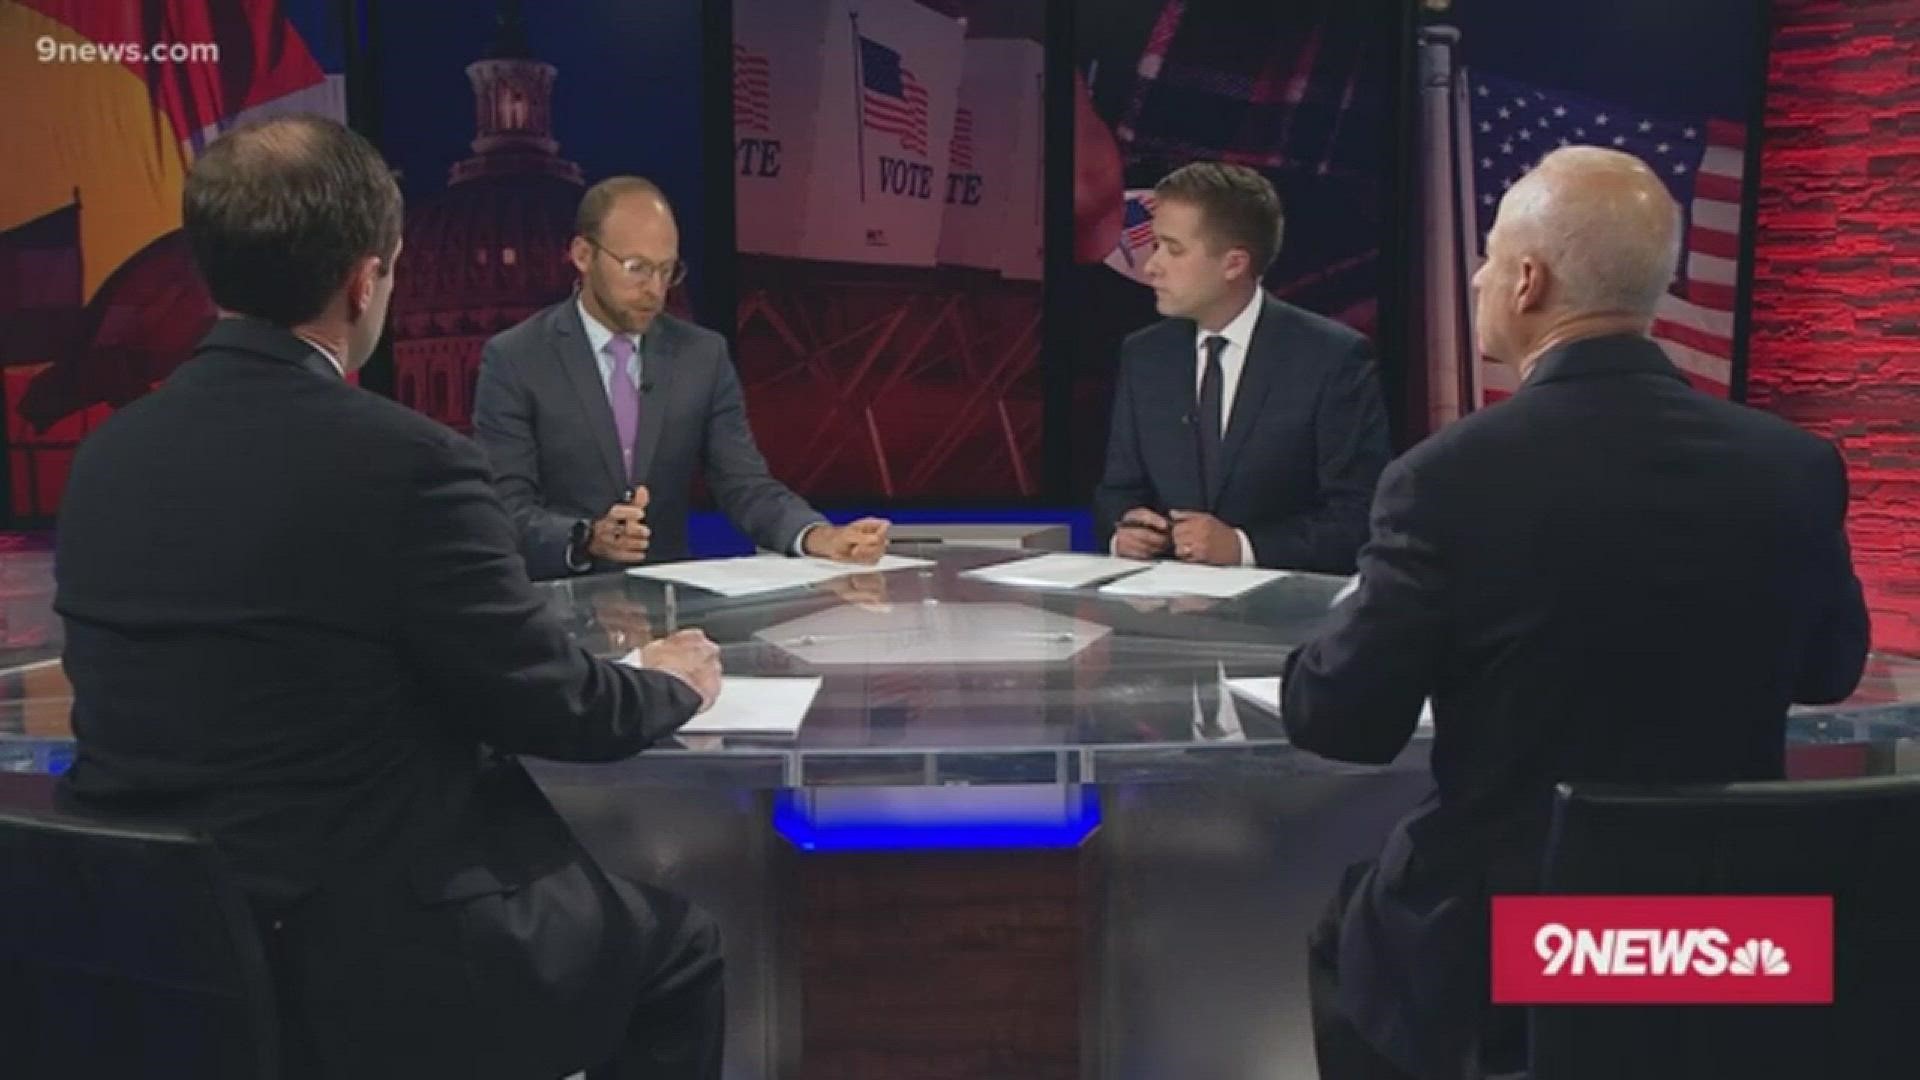 Mike Coffman discusses the Affordable Care Act and cuts to medicaid during his debate with Jason Crow on 9NEWS.